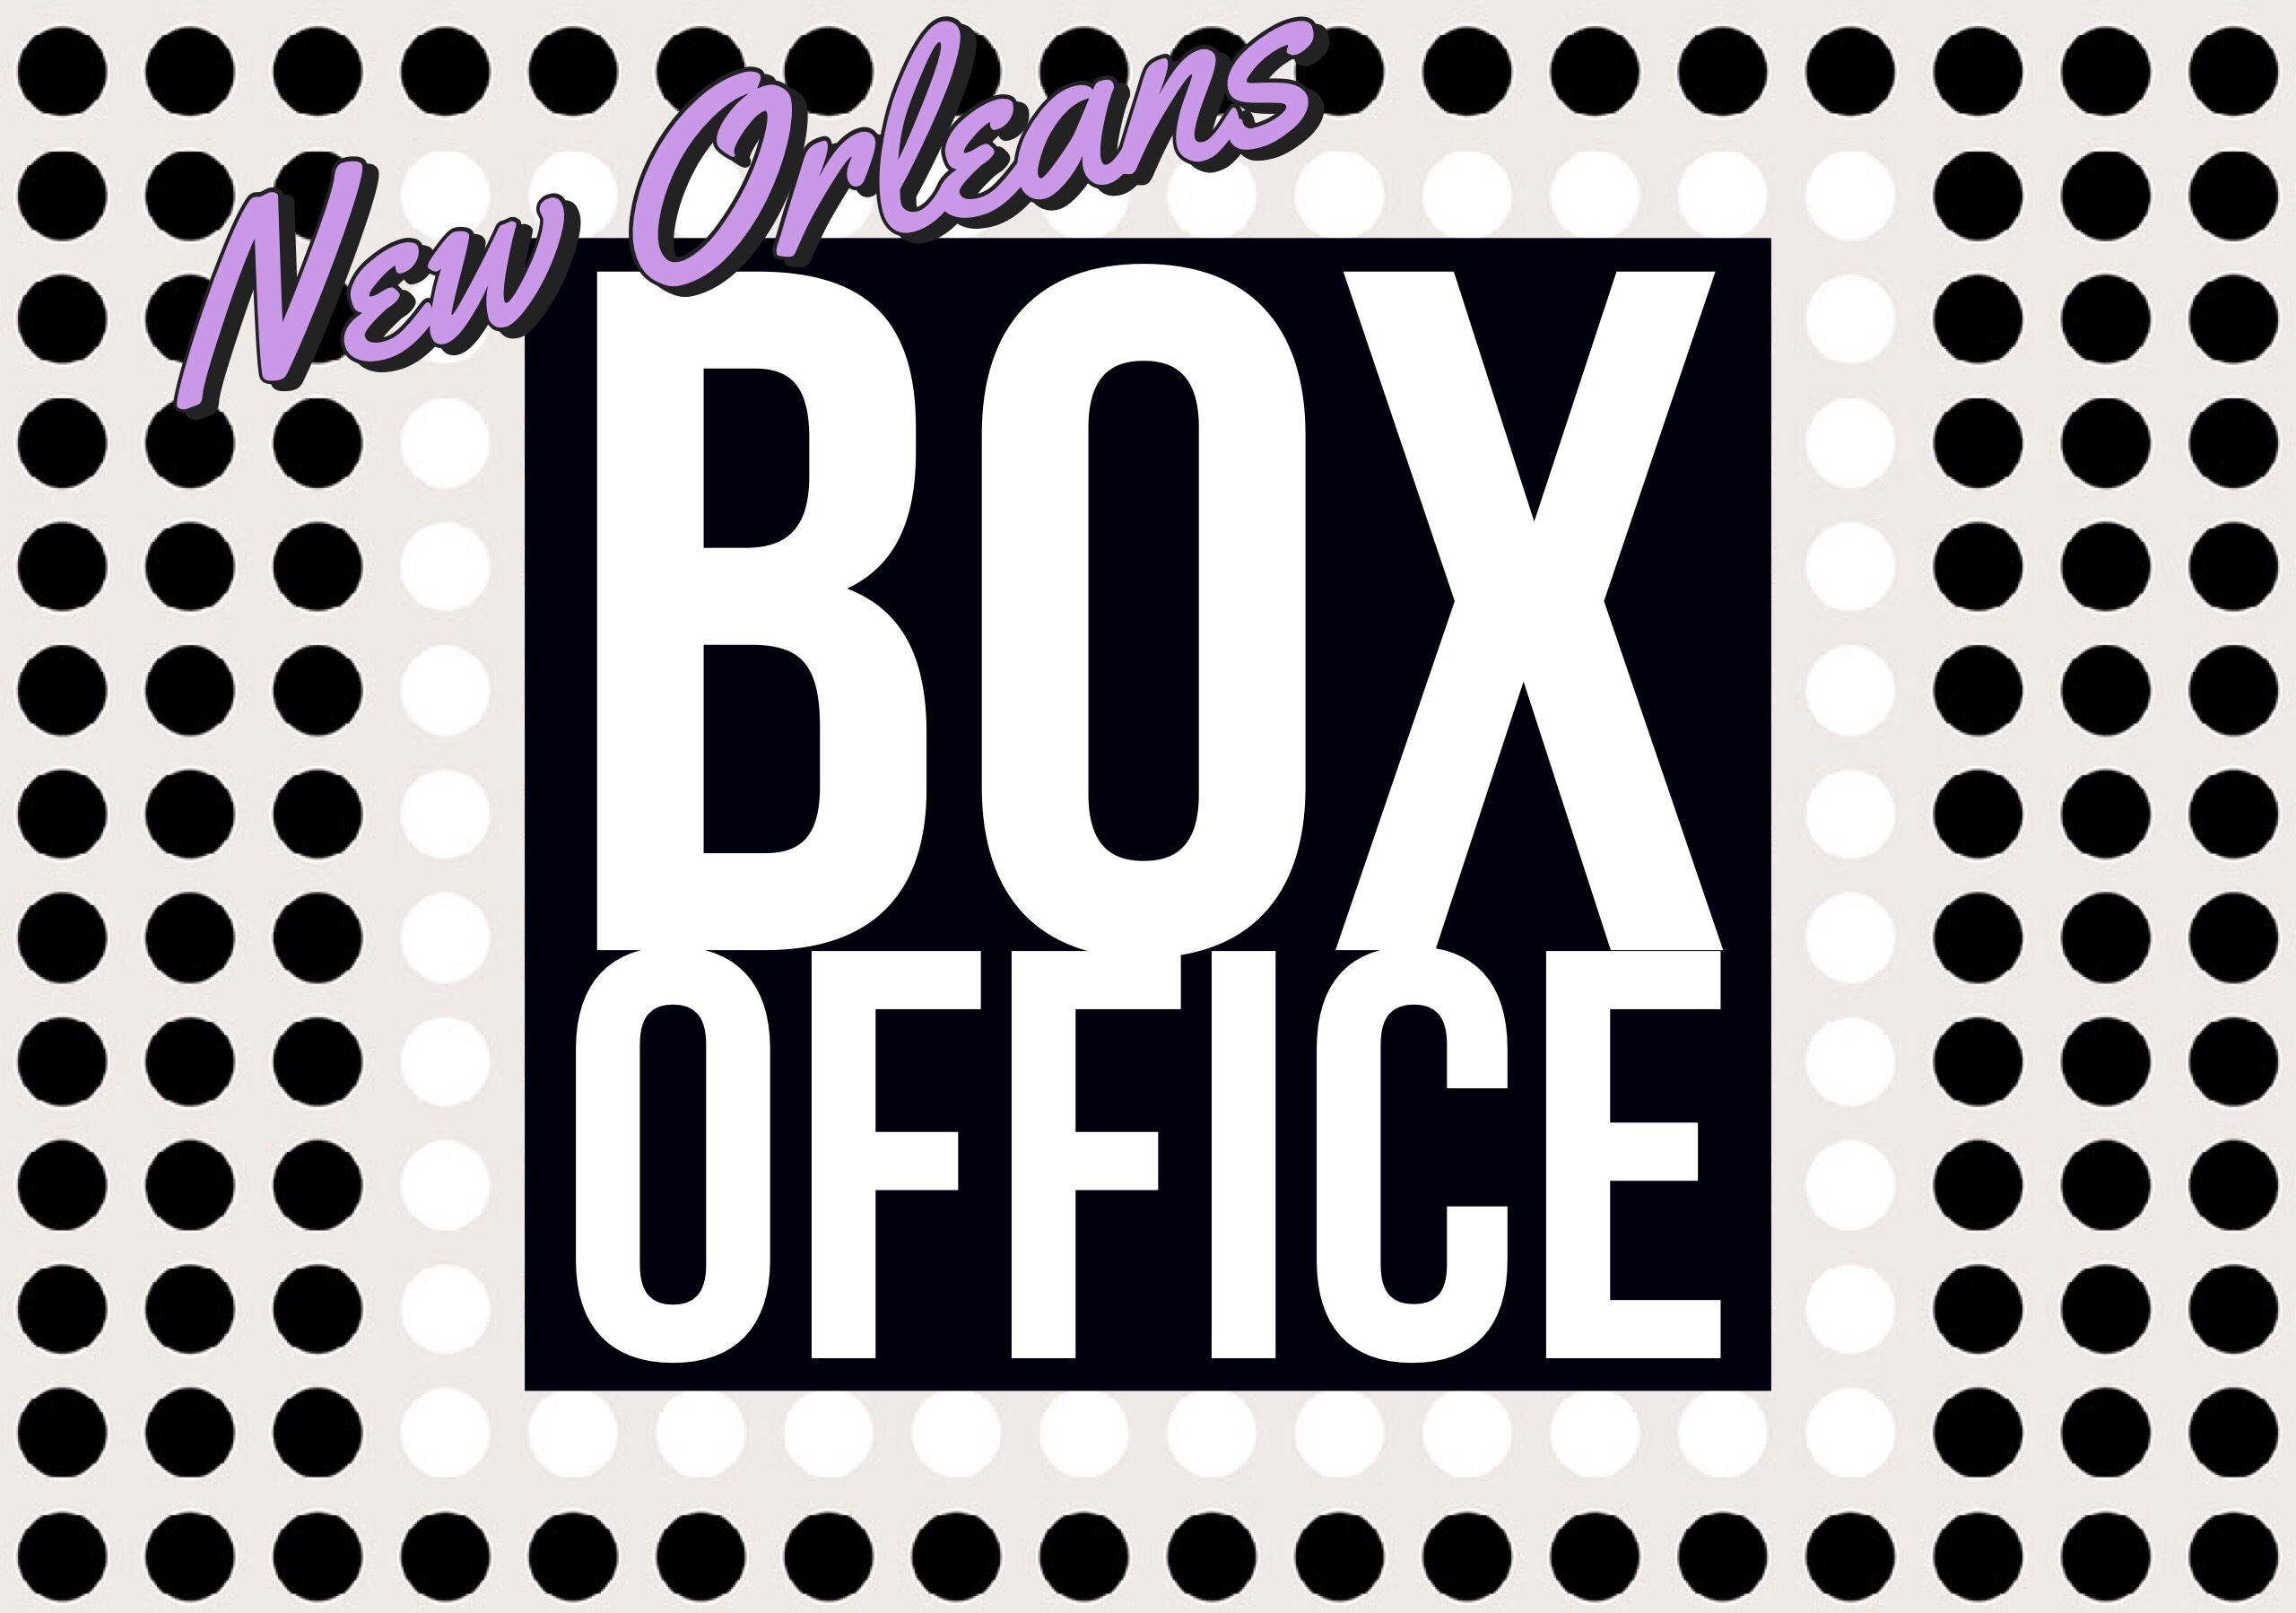 New Orleans Box Office